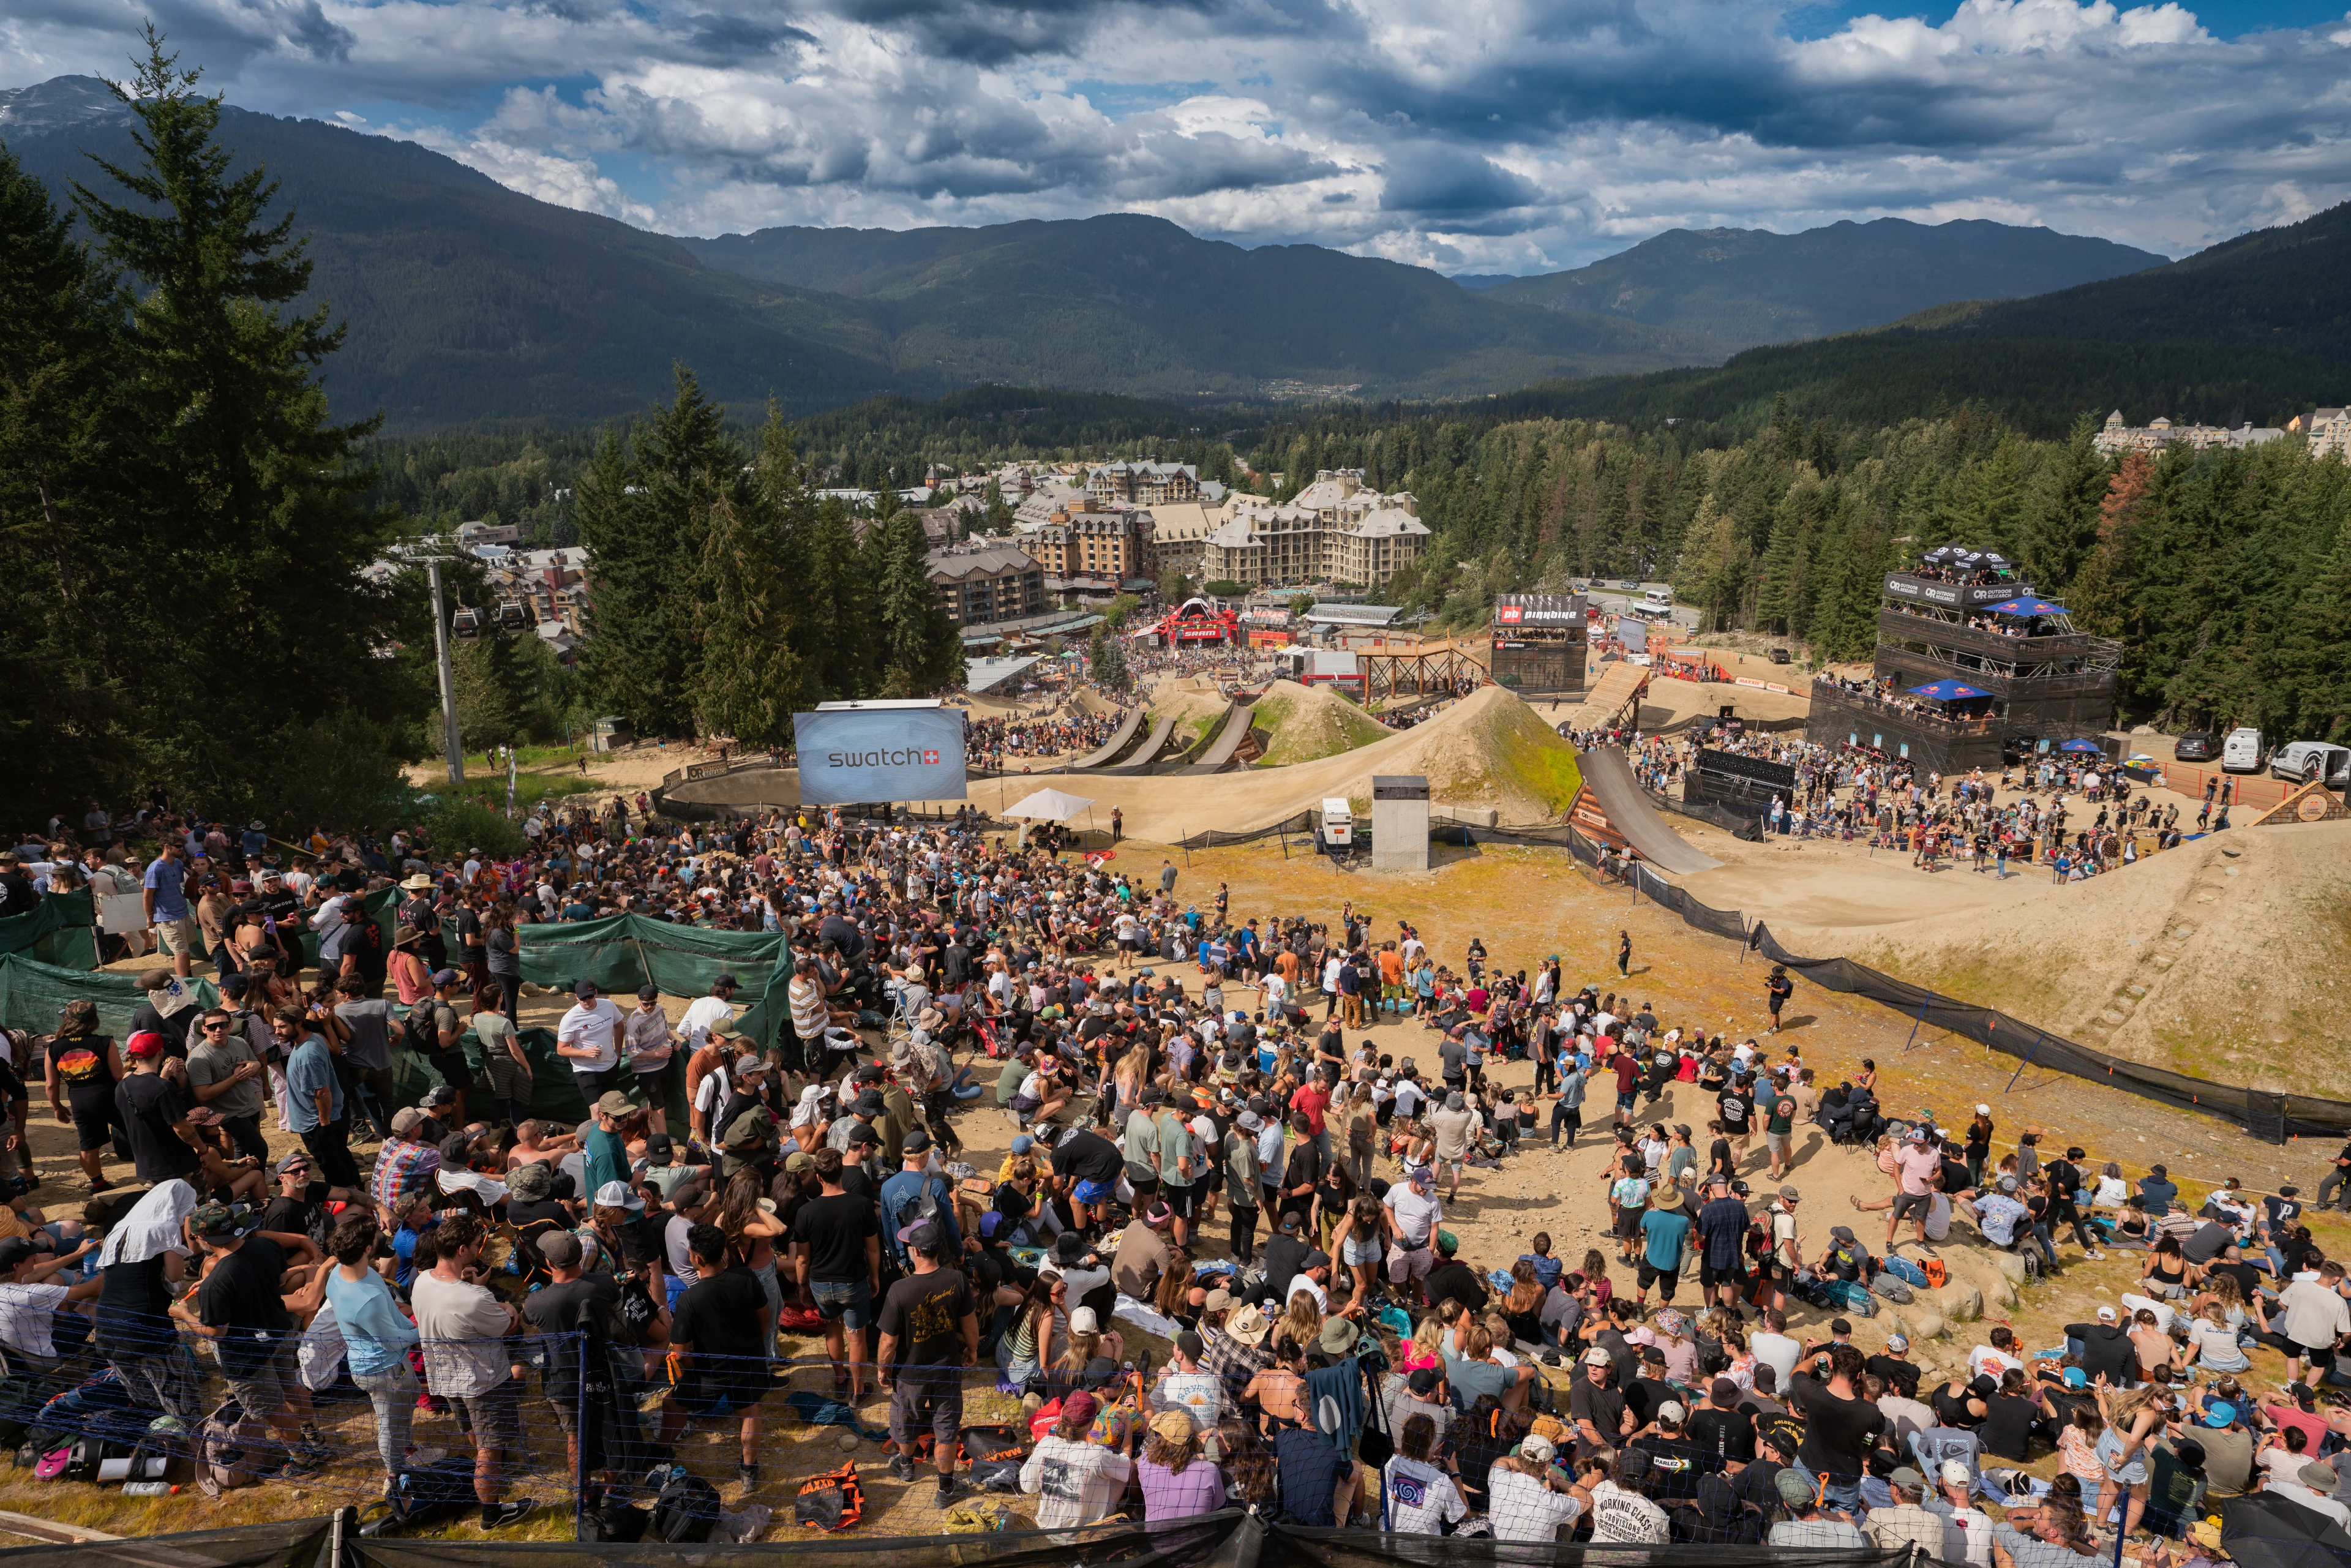 Overview of the location set-up at Crankworx Whistler, Canada